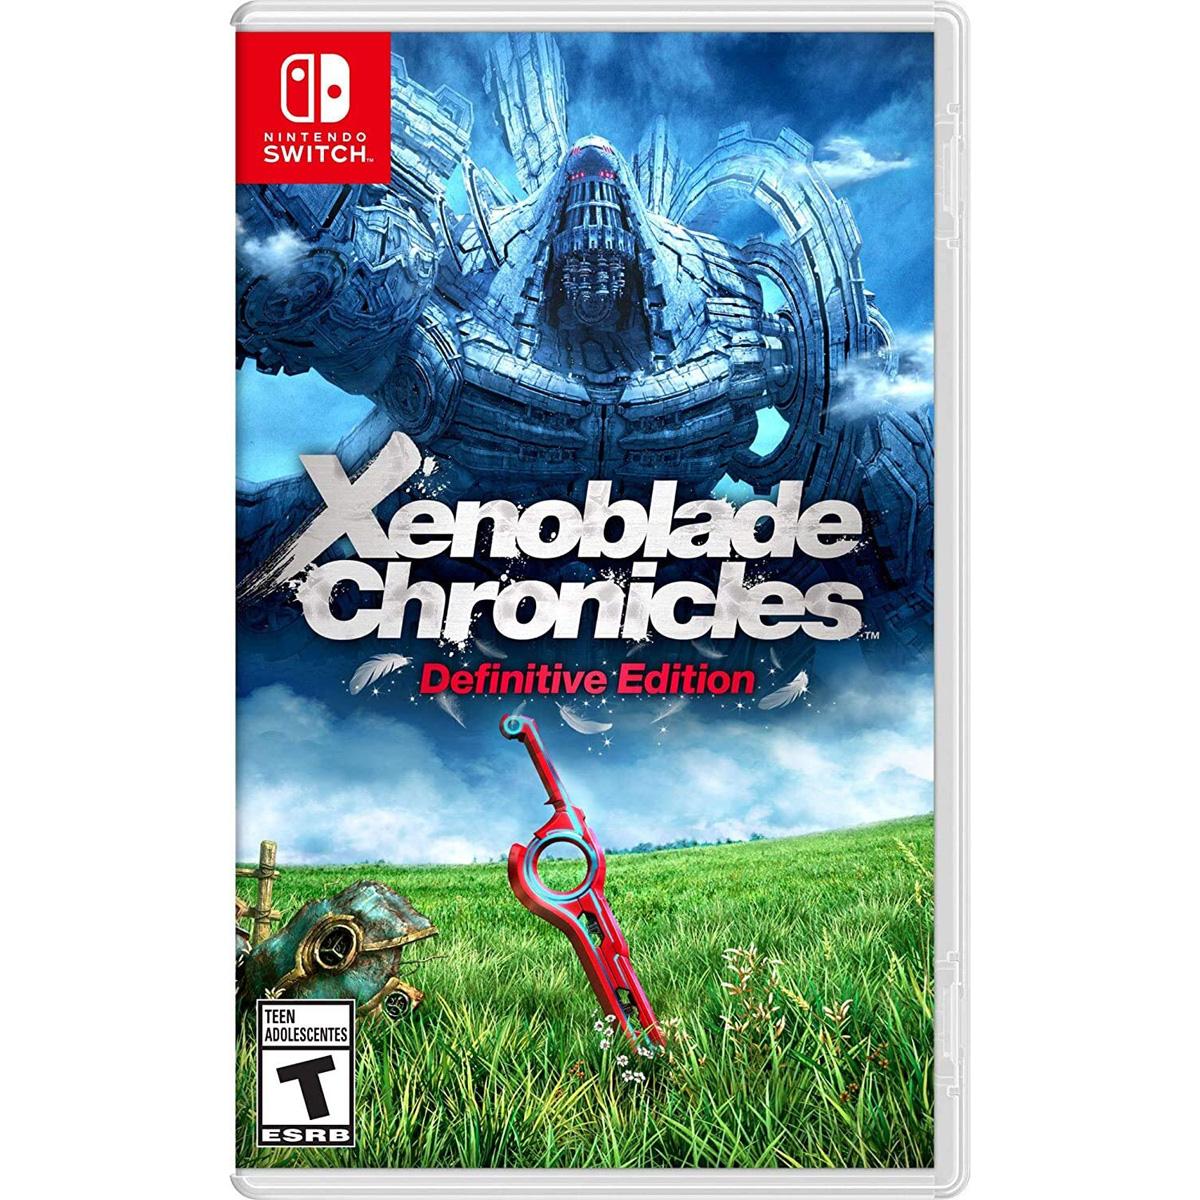 Xenoblade Chronicles: Definitive Edition Nintendo Switch for $39.99 Shipped